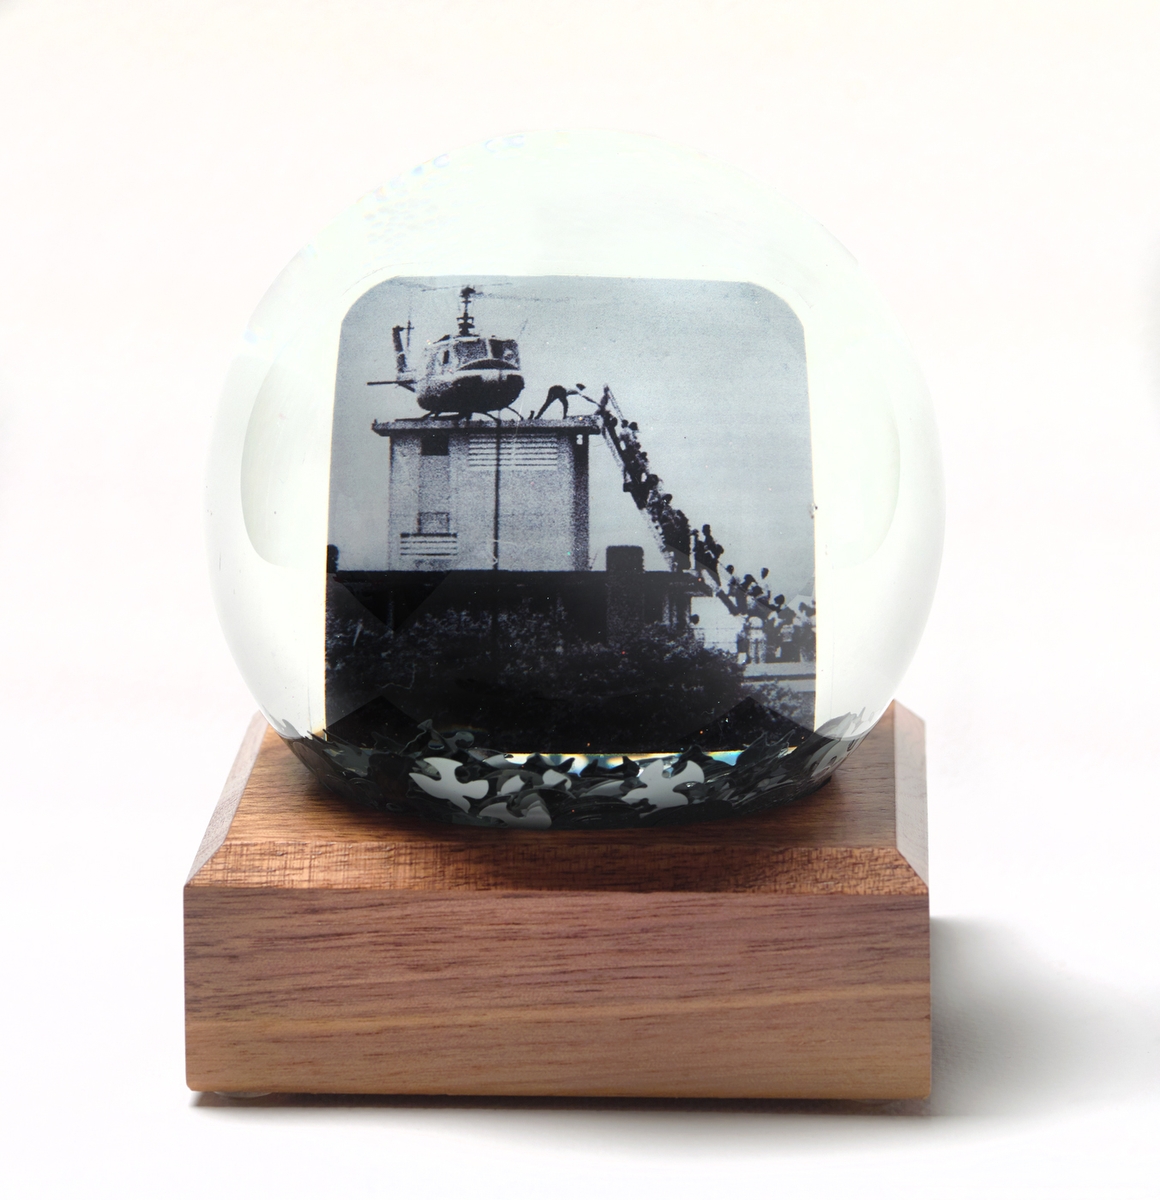 Phung Huynh, ‘April 30, 1975 Snowglobe,’ 2021, Mixed media sculpture, Courtesy of the artist